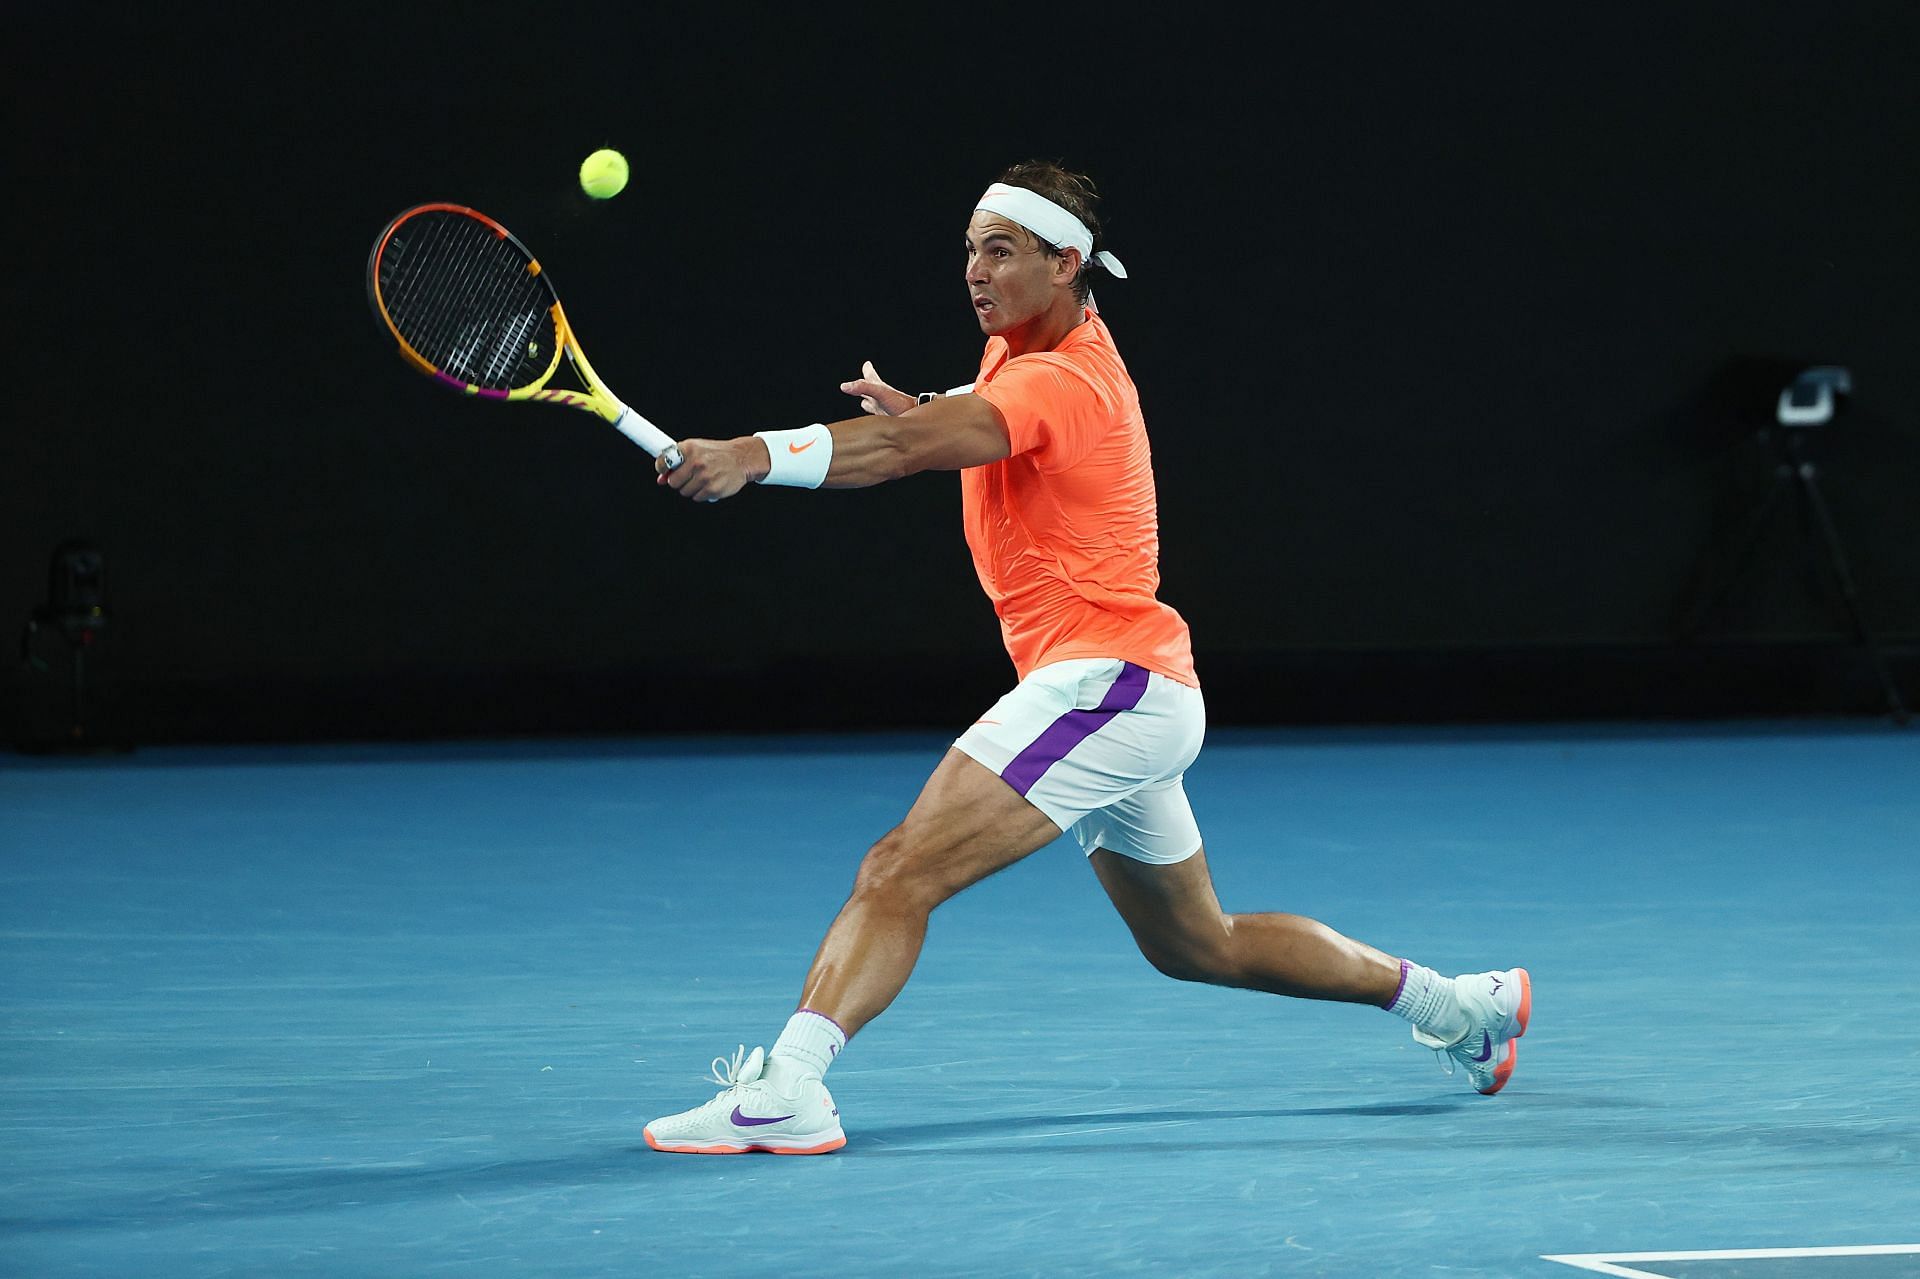 Rafael Nadal will be warming up with an ATP 250 in Melbourne before the Australian Open